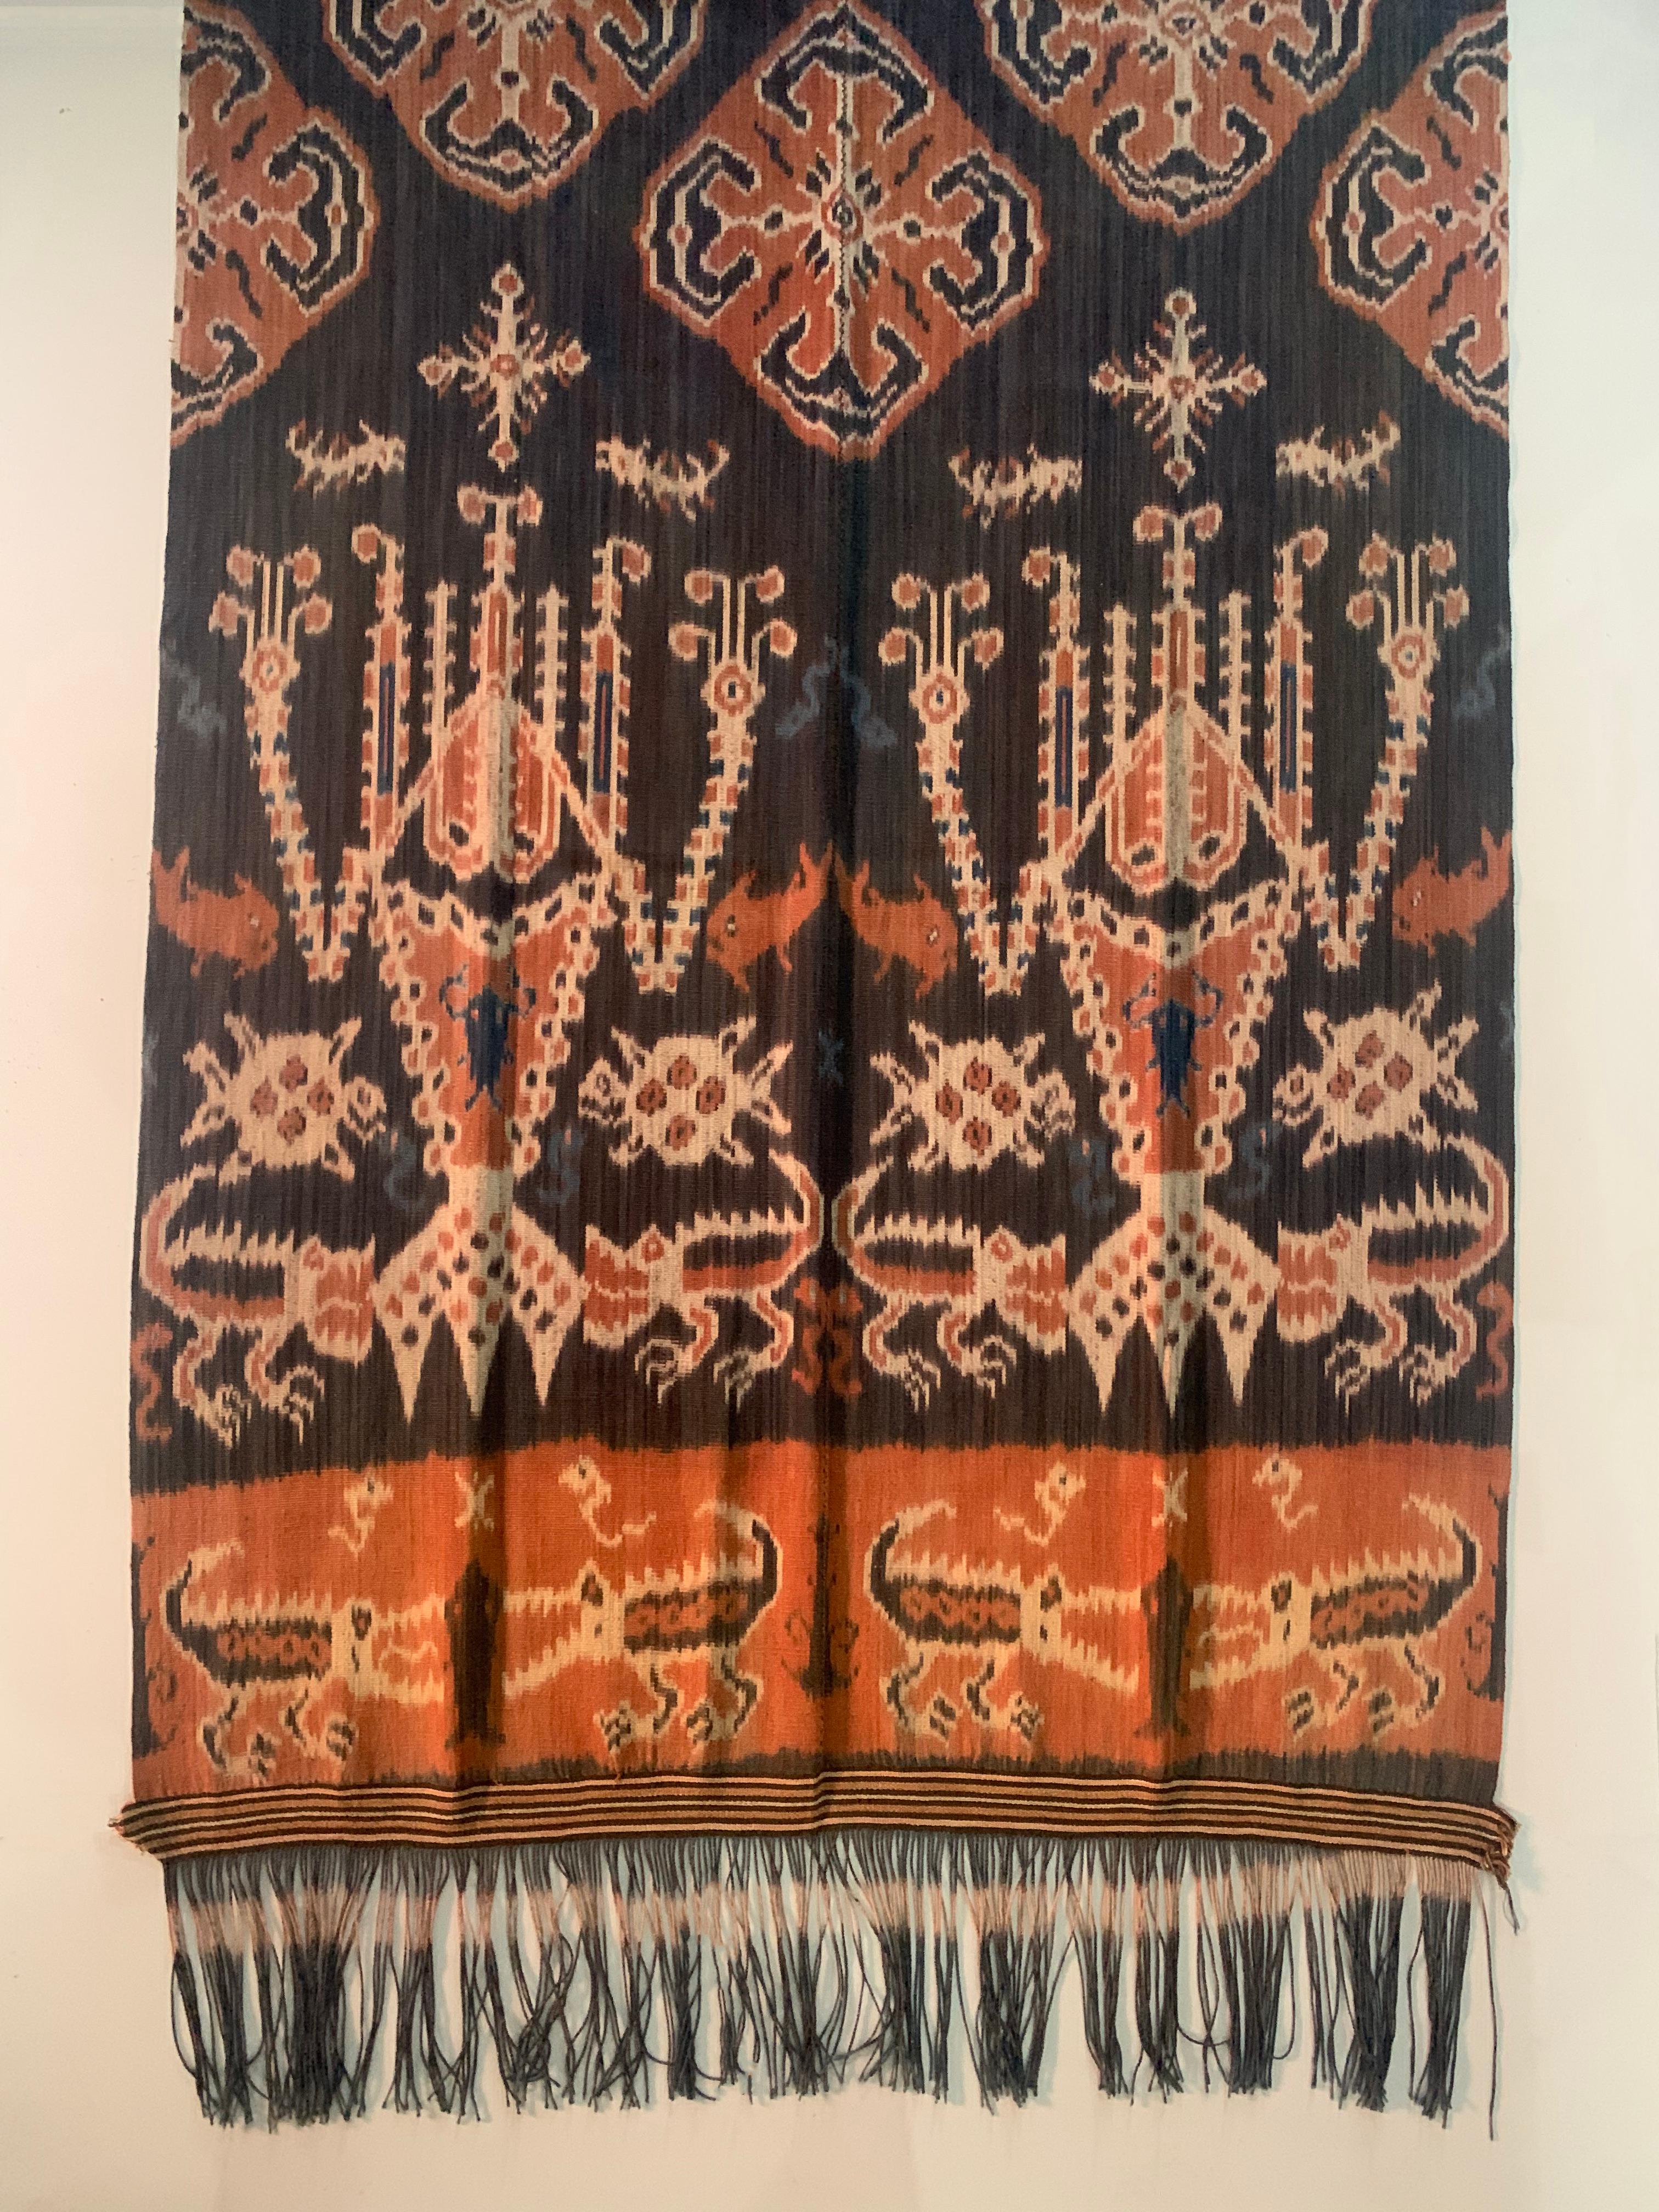 This Ikat textile originates from the Island of Sumba, Indonesia. It is hand-woven using naturally dyed yarns via a method passed on through generations. It features a stunning array of distinct tribal patterns as well as crocodile, fish & turtle